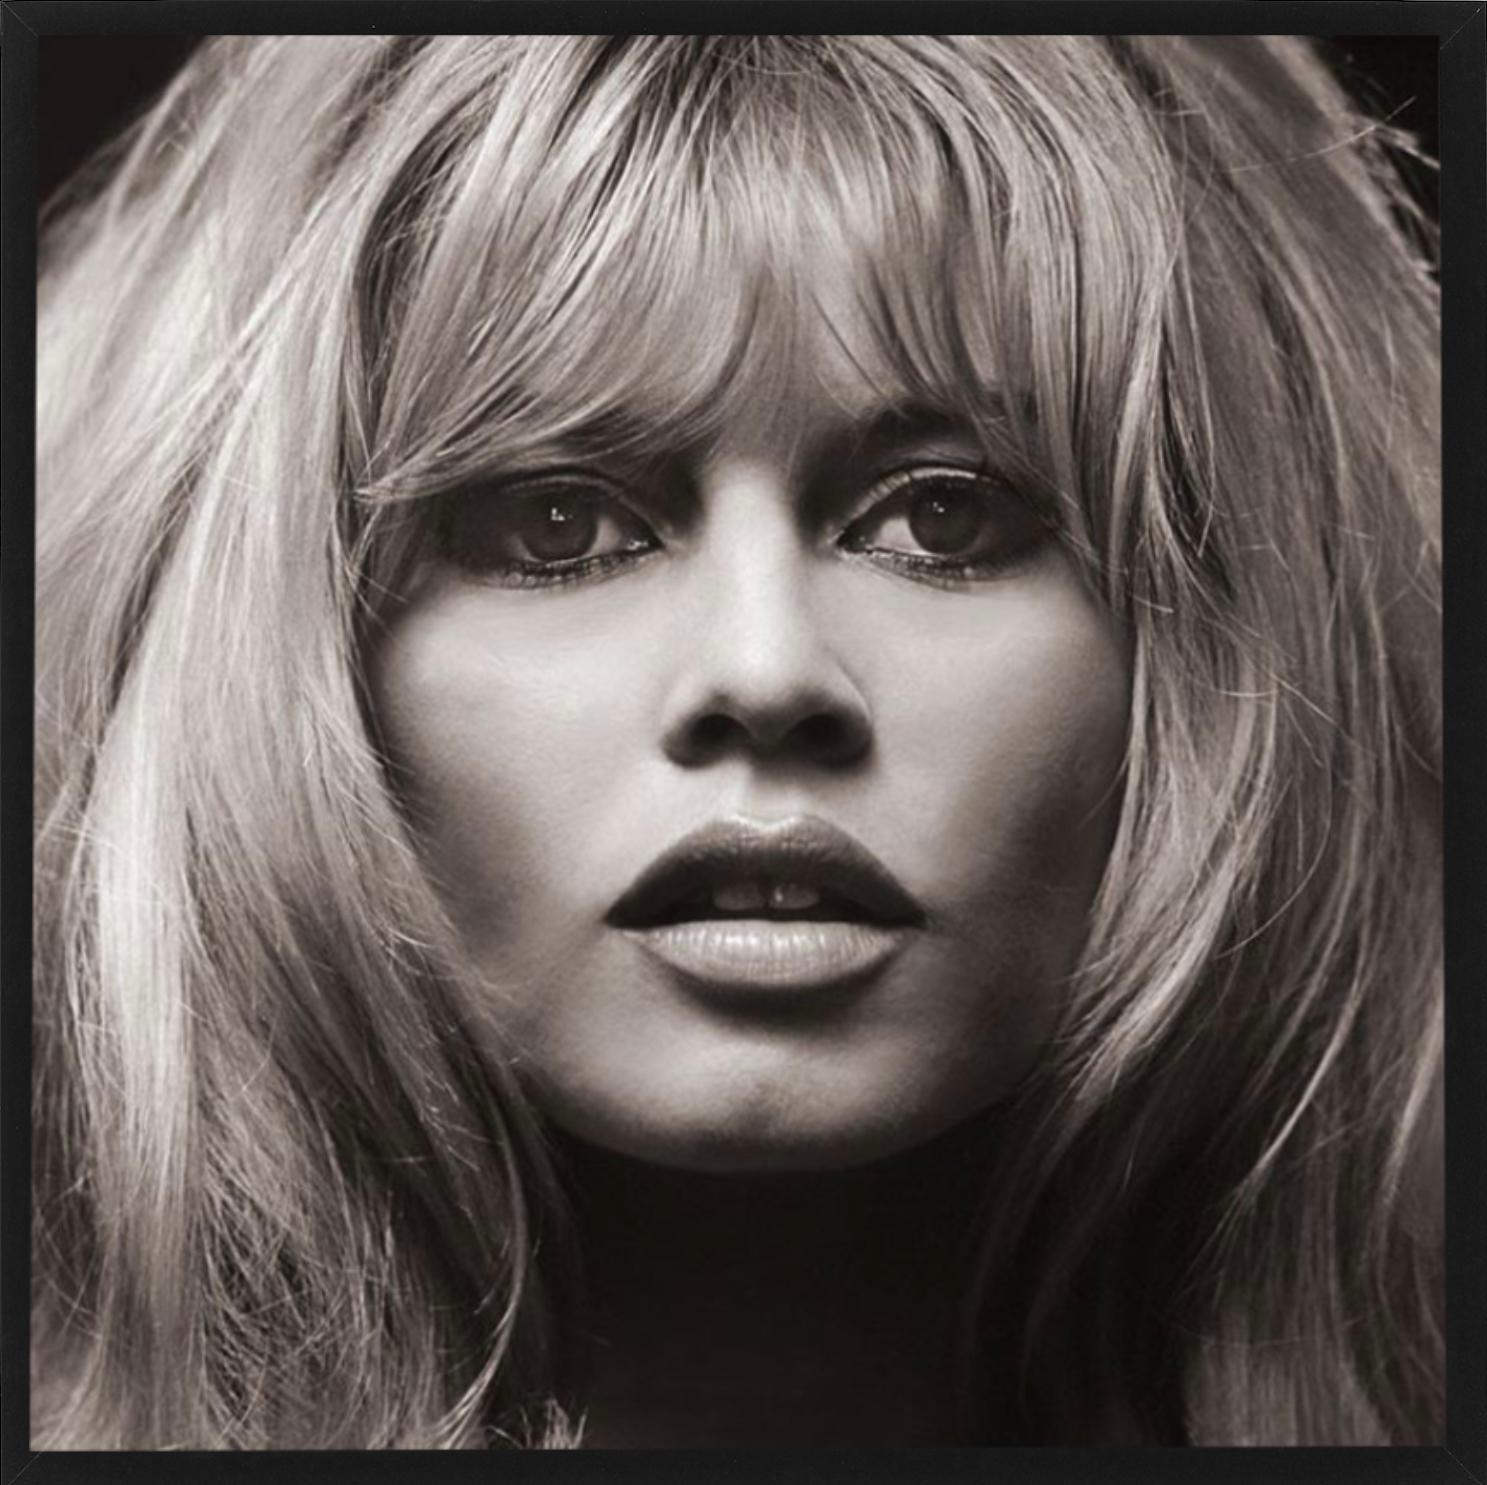 Brigitte Bardot - portrait of the French actress and cultural icon - Contemporary Photograph by Douglas Kirkland